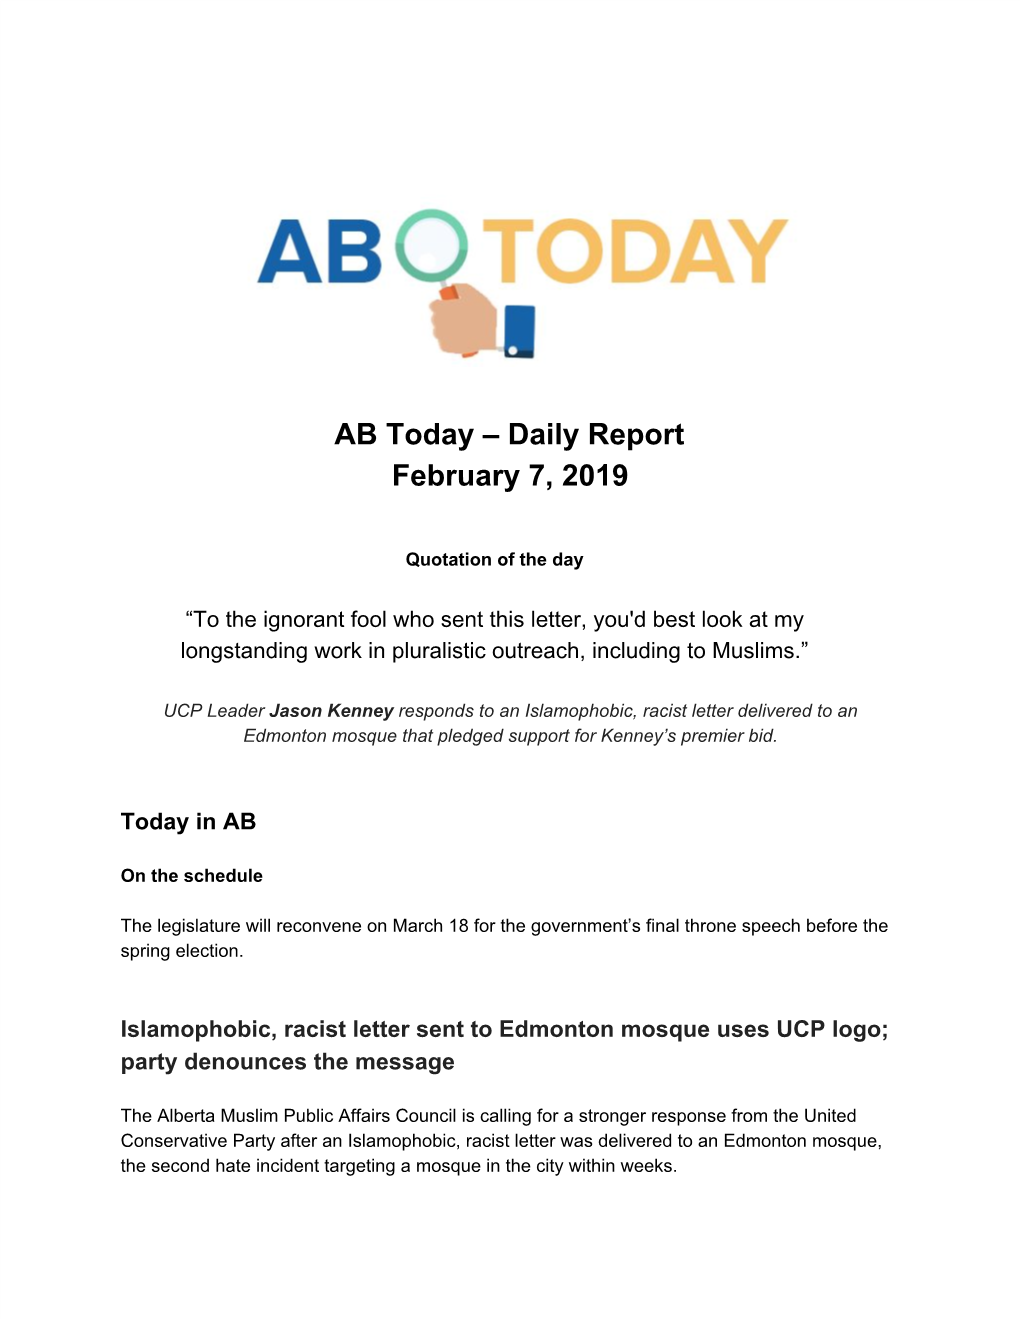 AB Today – Daily Report February 7, 2019